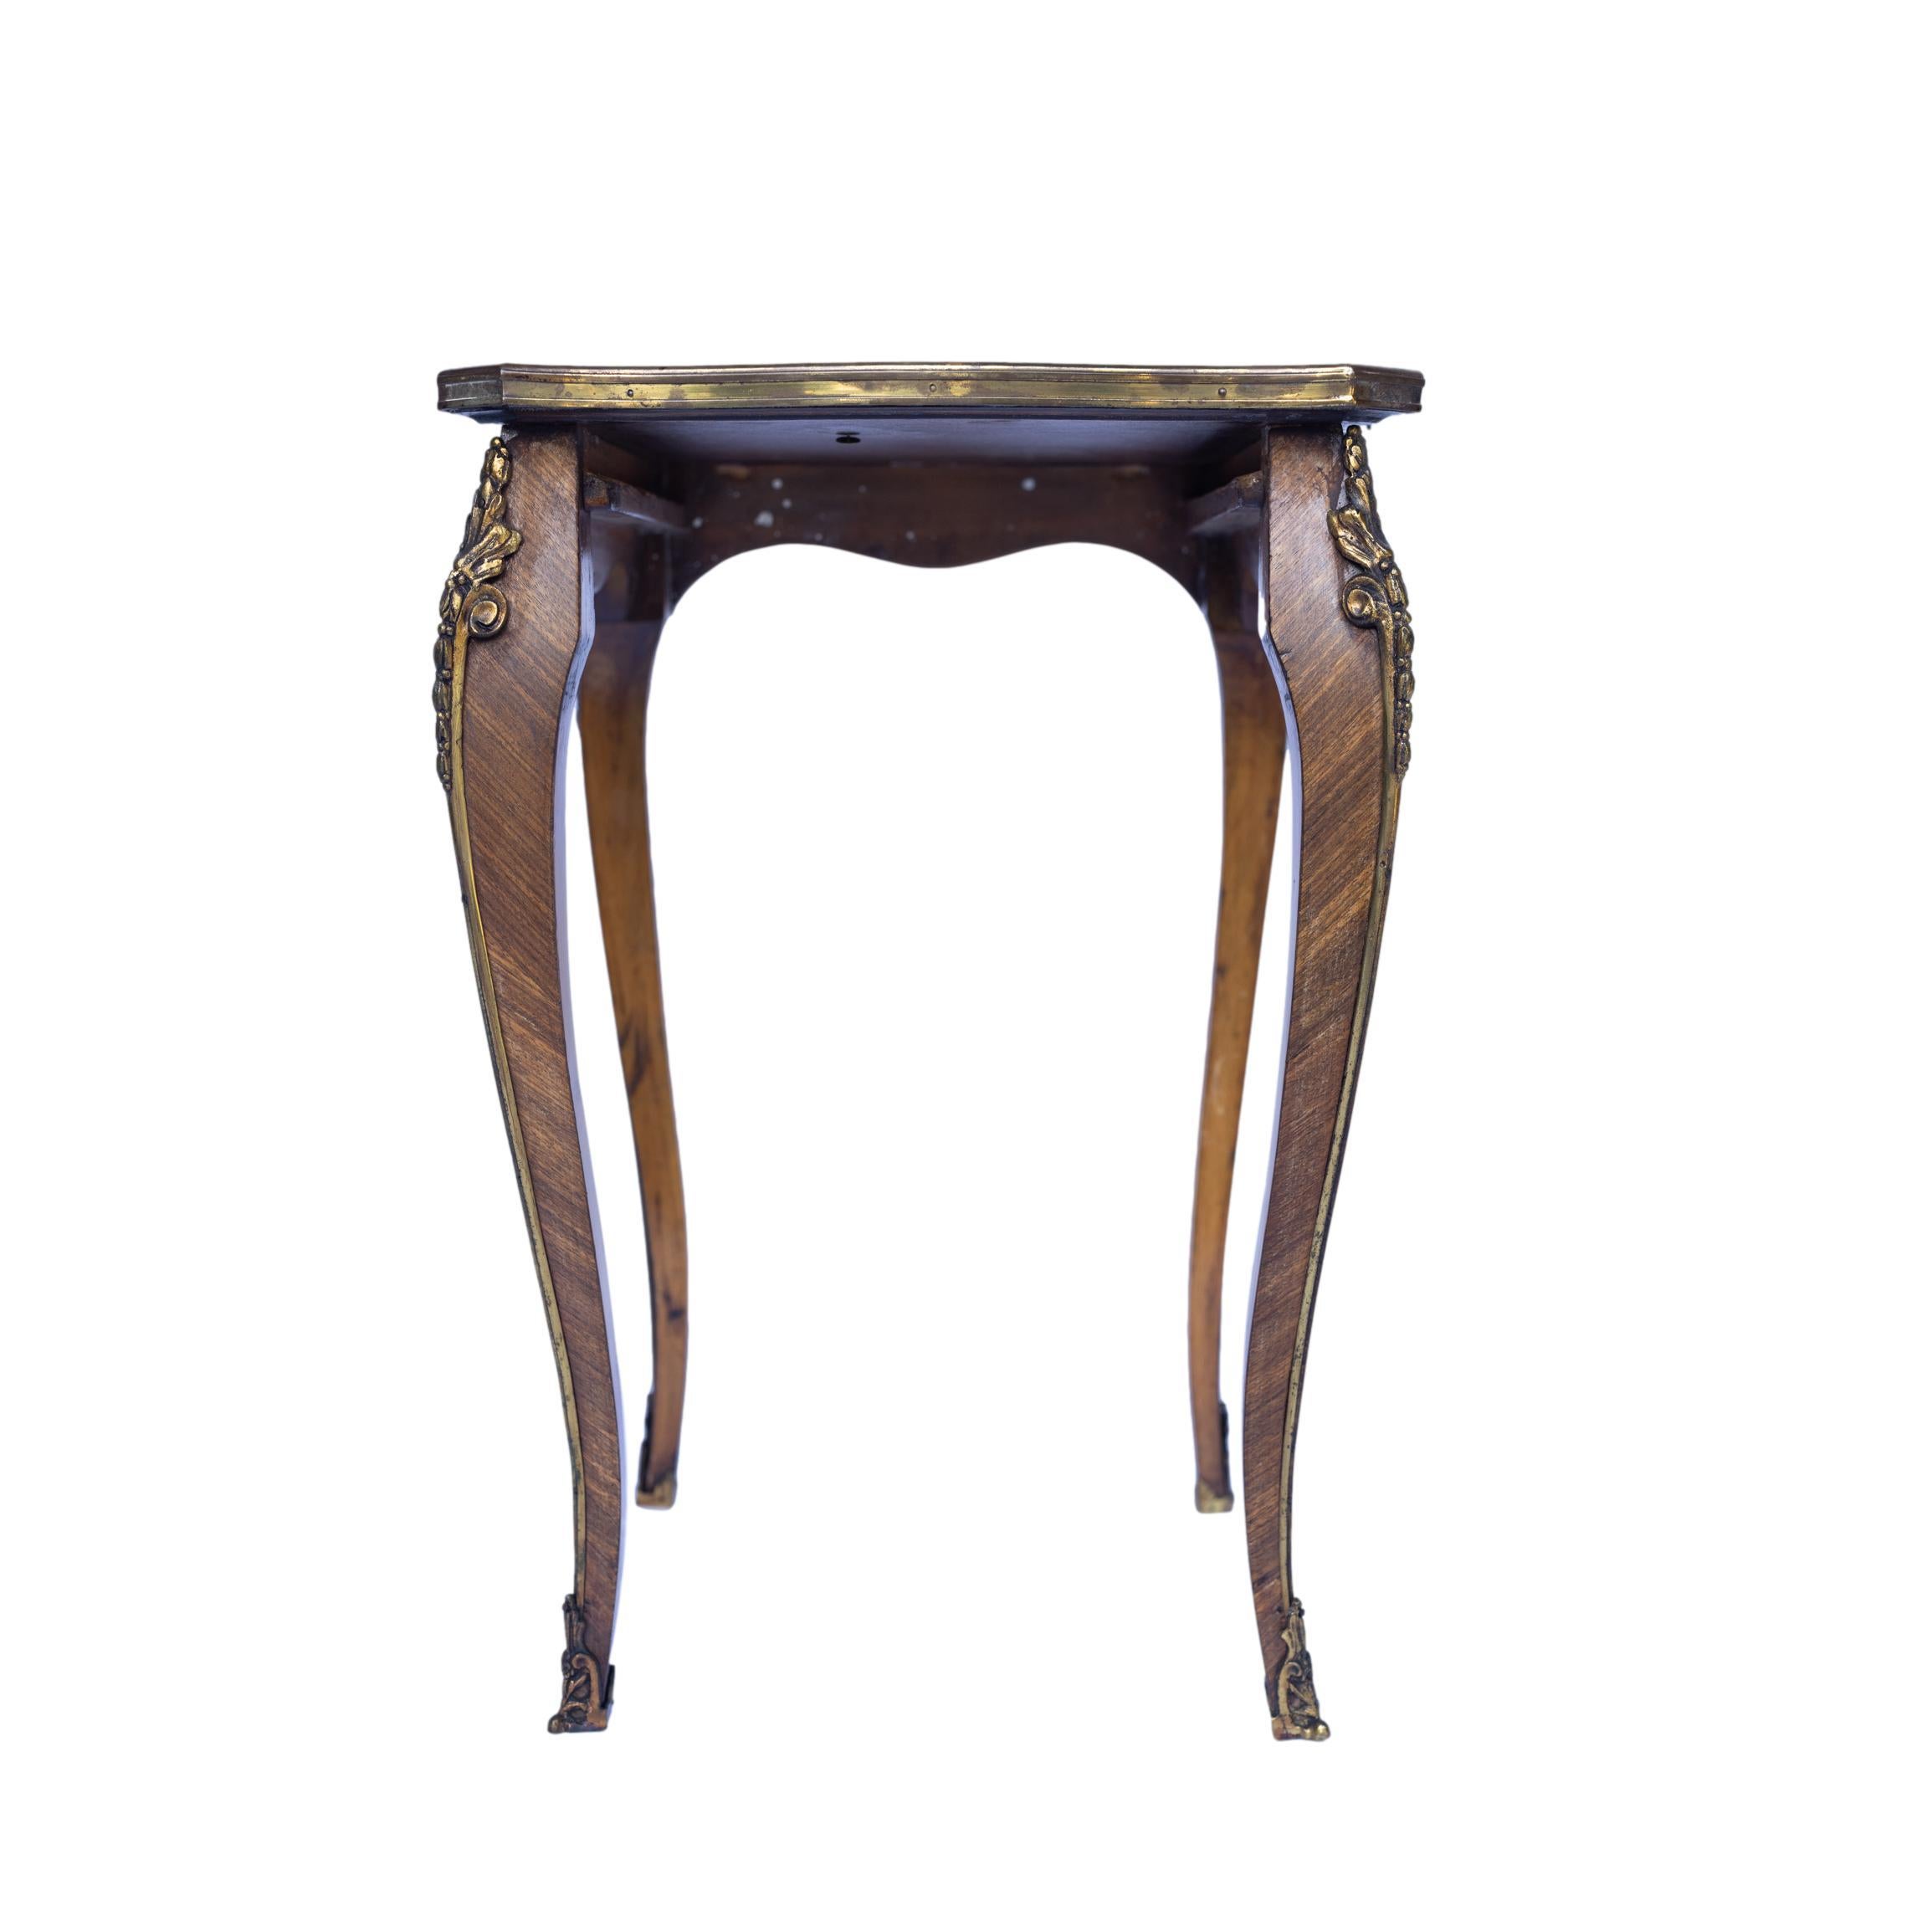 Set Three Louis XV-Style Kingwood and Parquetry Nesting Tables, French, c. 1880 For Sale 5